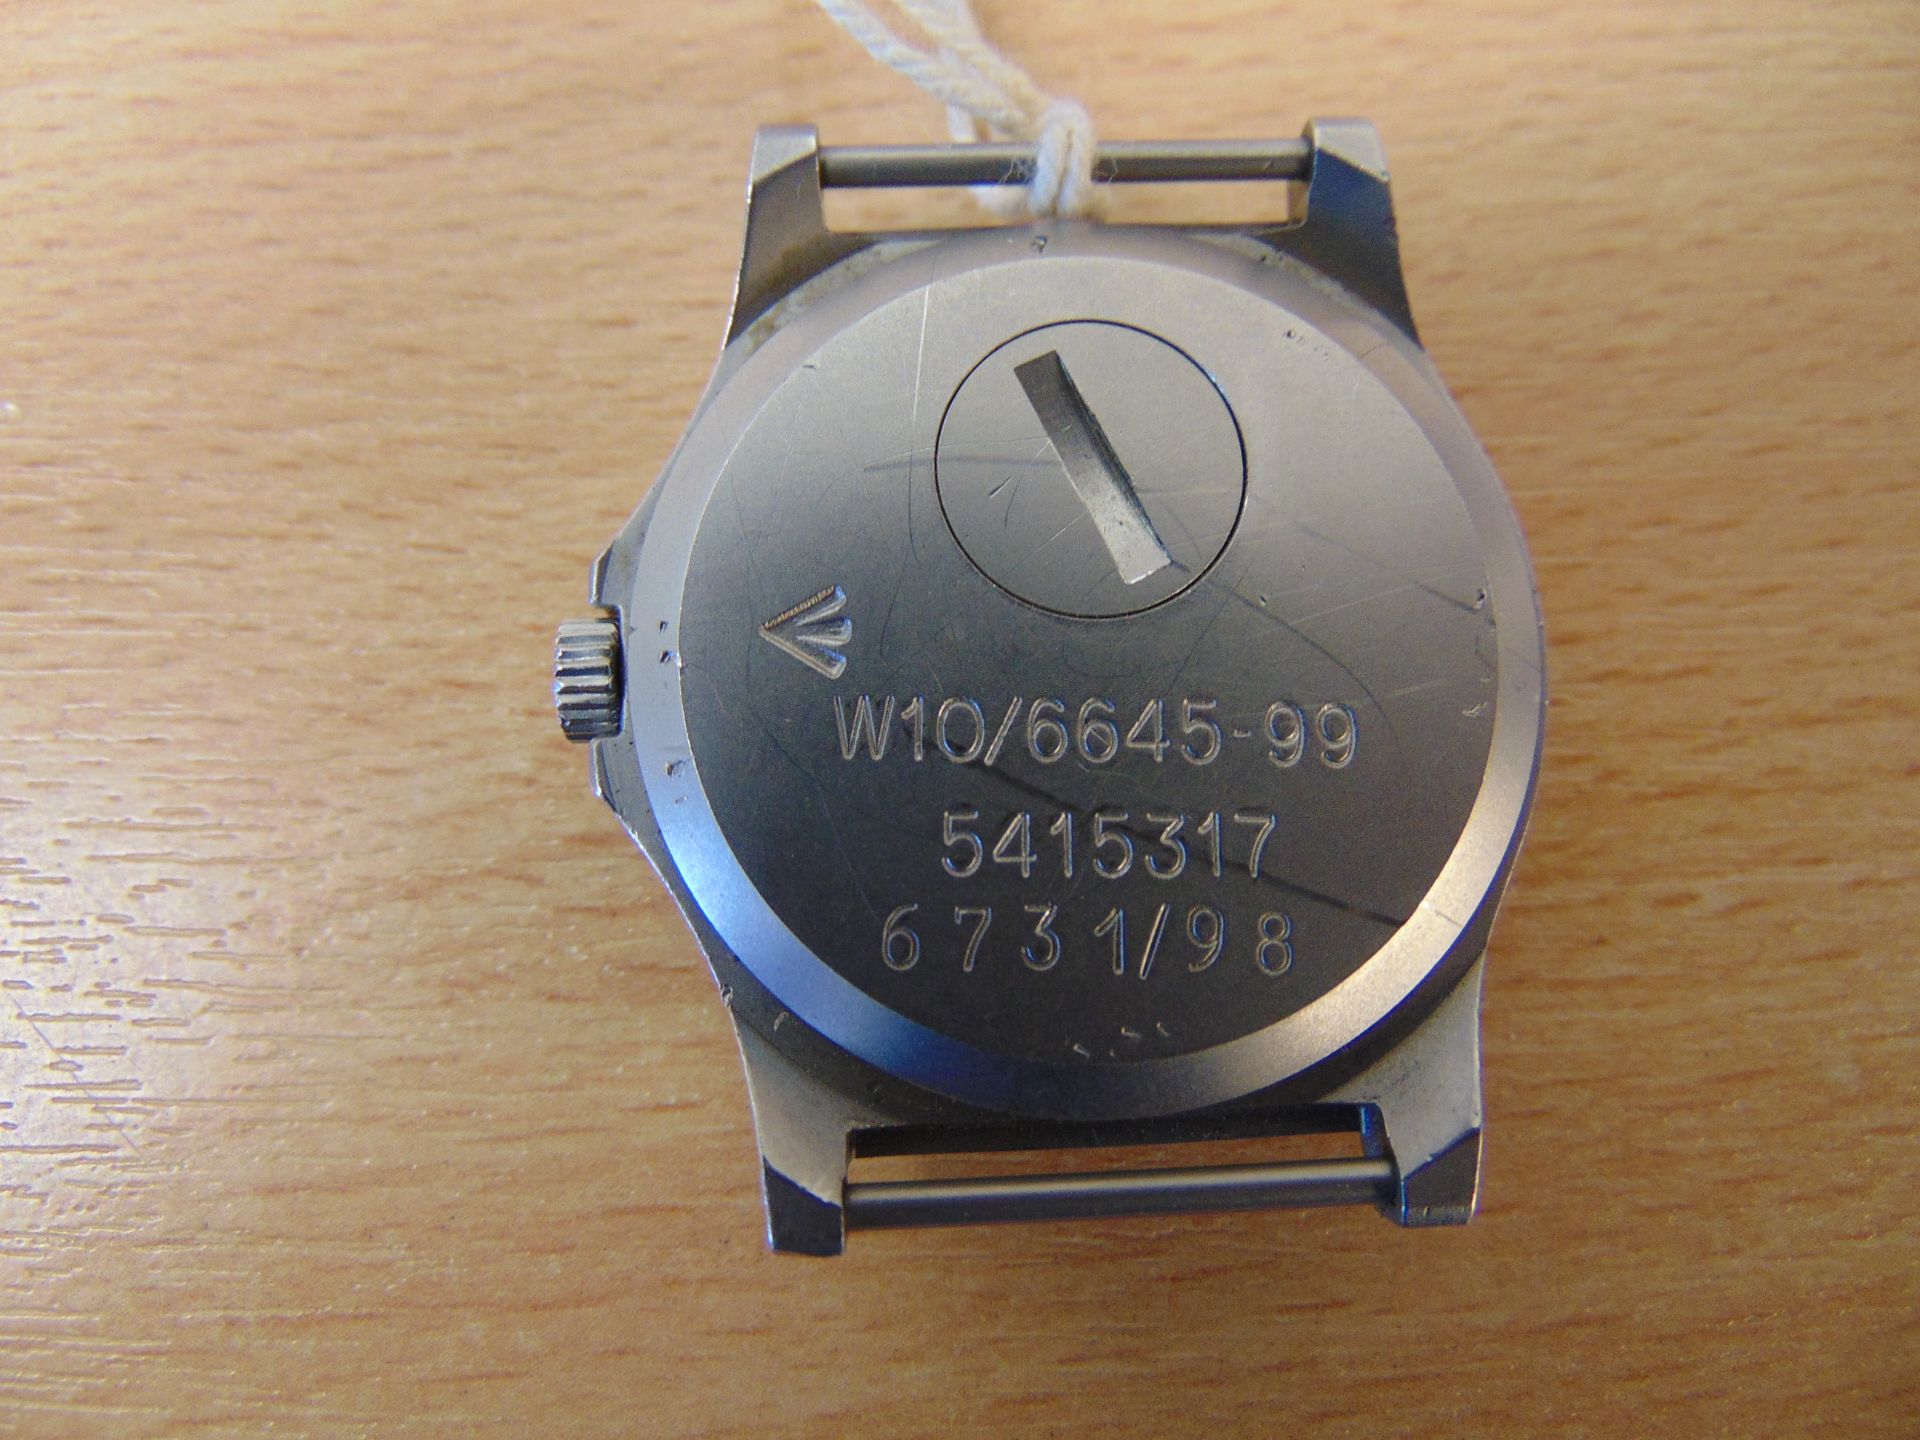 CWC W10 British Army service watch Nato Marks, Date 1998 - Image 3 of 4